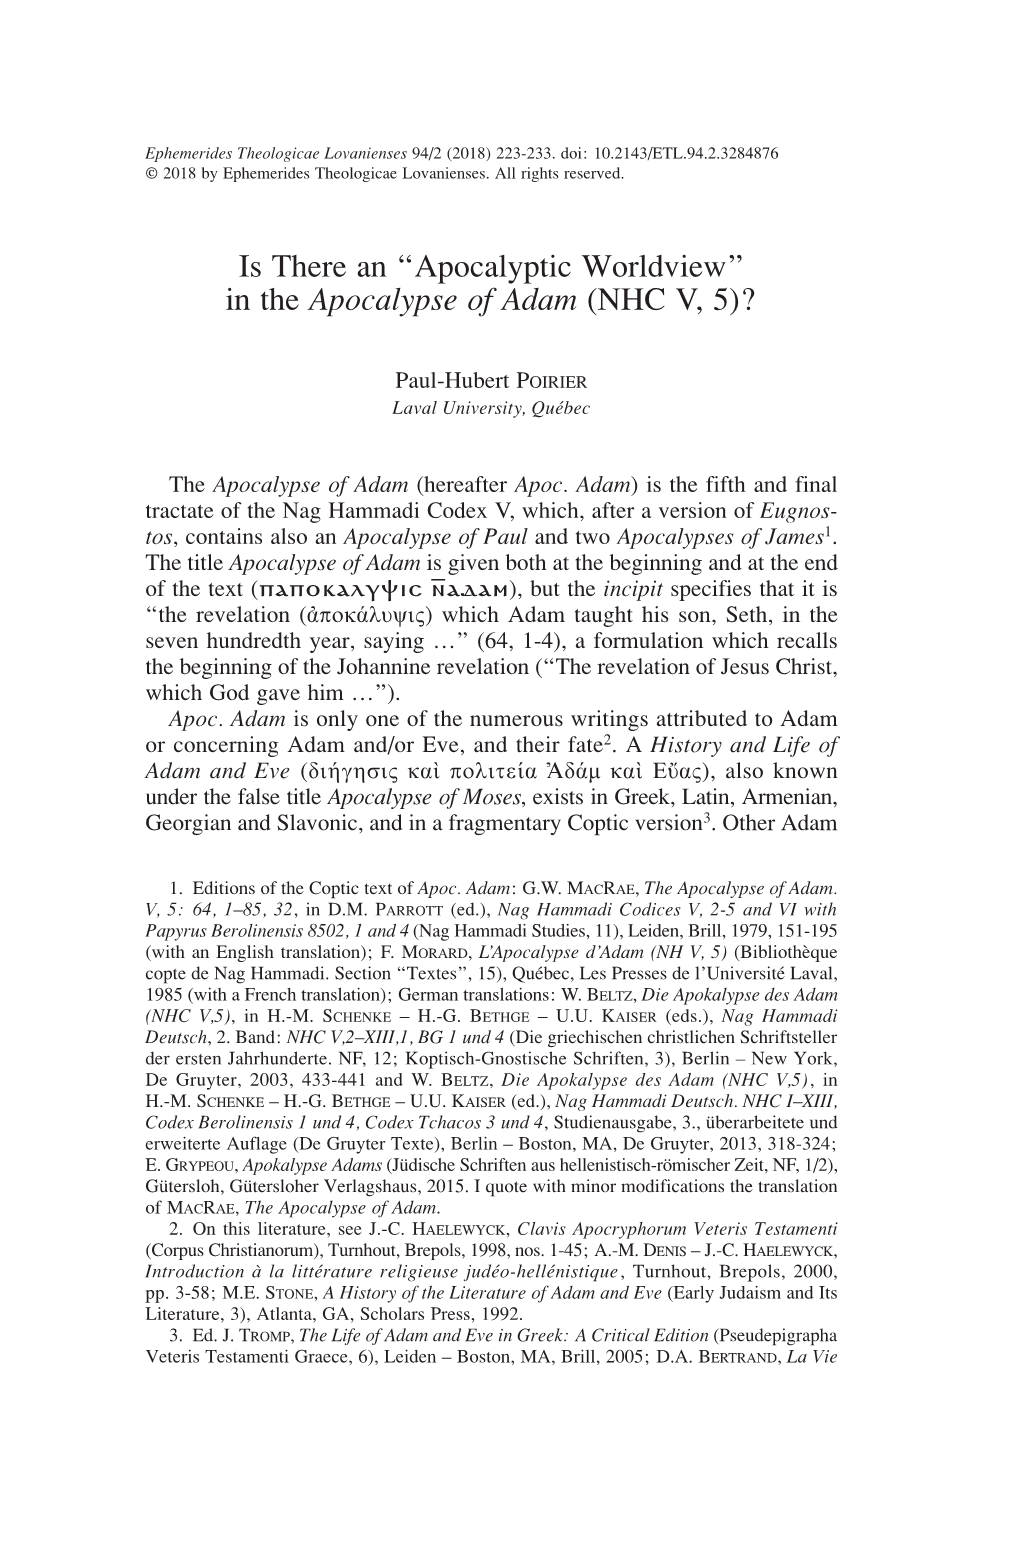 Is There an “Apocalyptic Worldview” in the Apocalypse of Adam (NHC V, 5)?